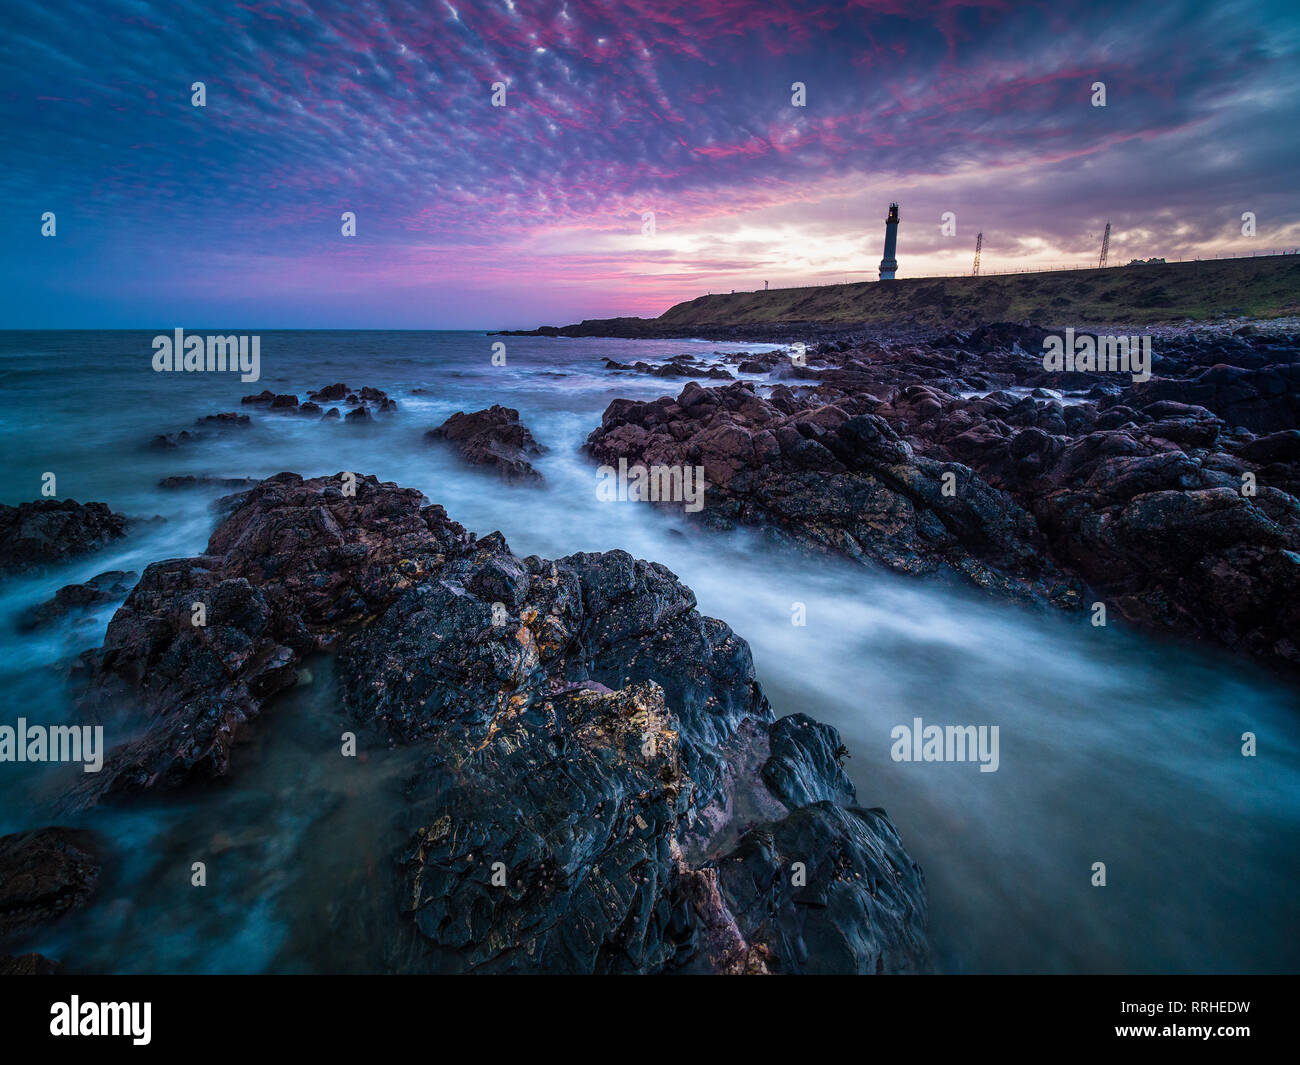 Girdle Ness lighthouse in Aberdeen during sunrise with rocks and waves in the foreground. Stock Photo